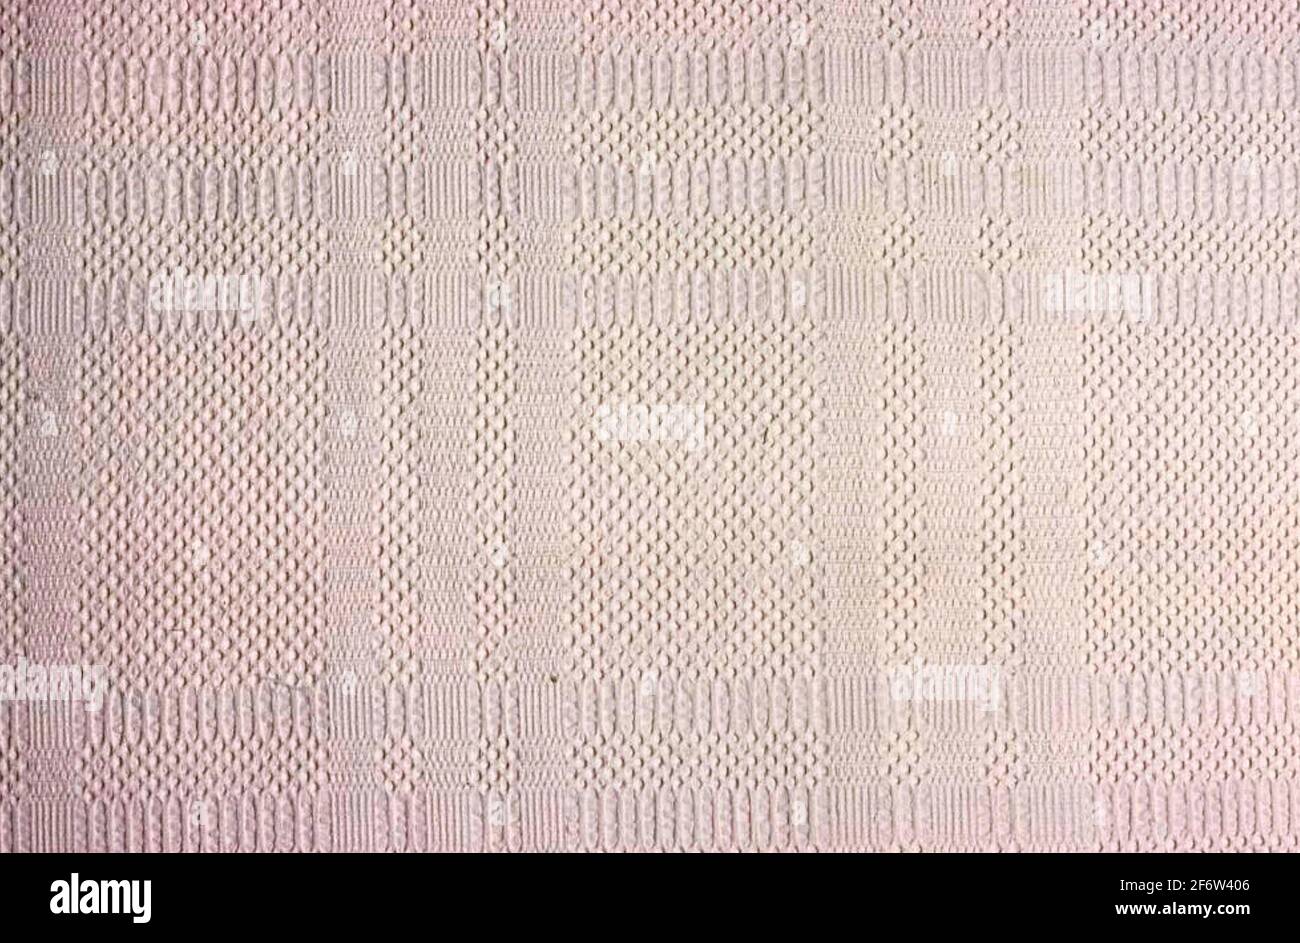 Coverlet - c. 1840 - United States. Cotton, undulating plain weave with areas of warp floats; two loom width joined. 1830 - 1850. Stock Photo